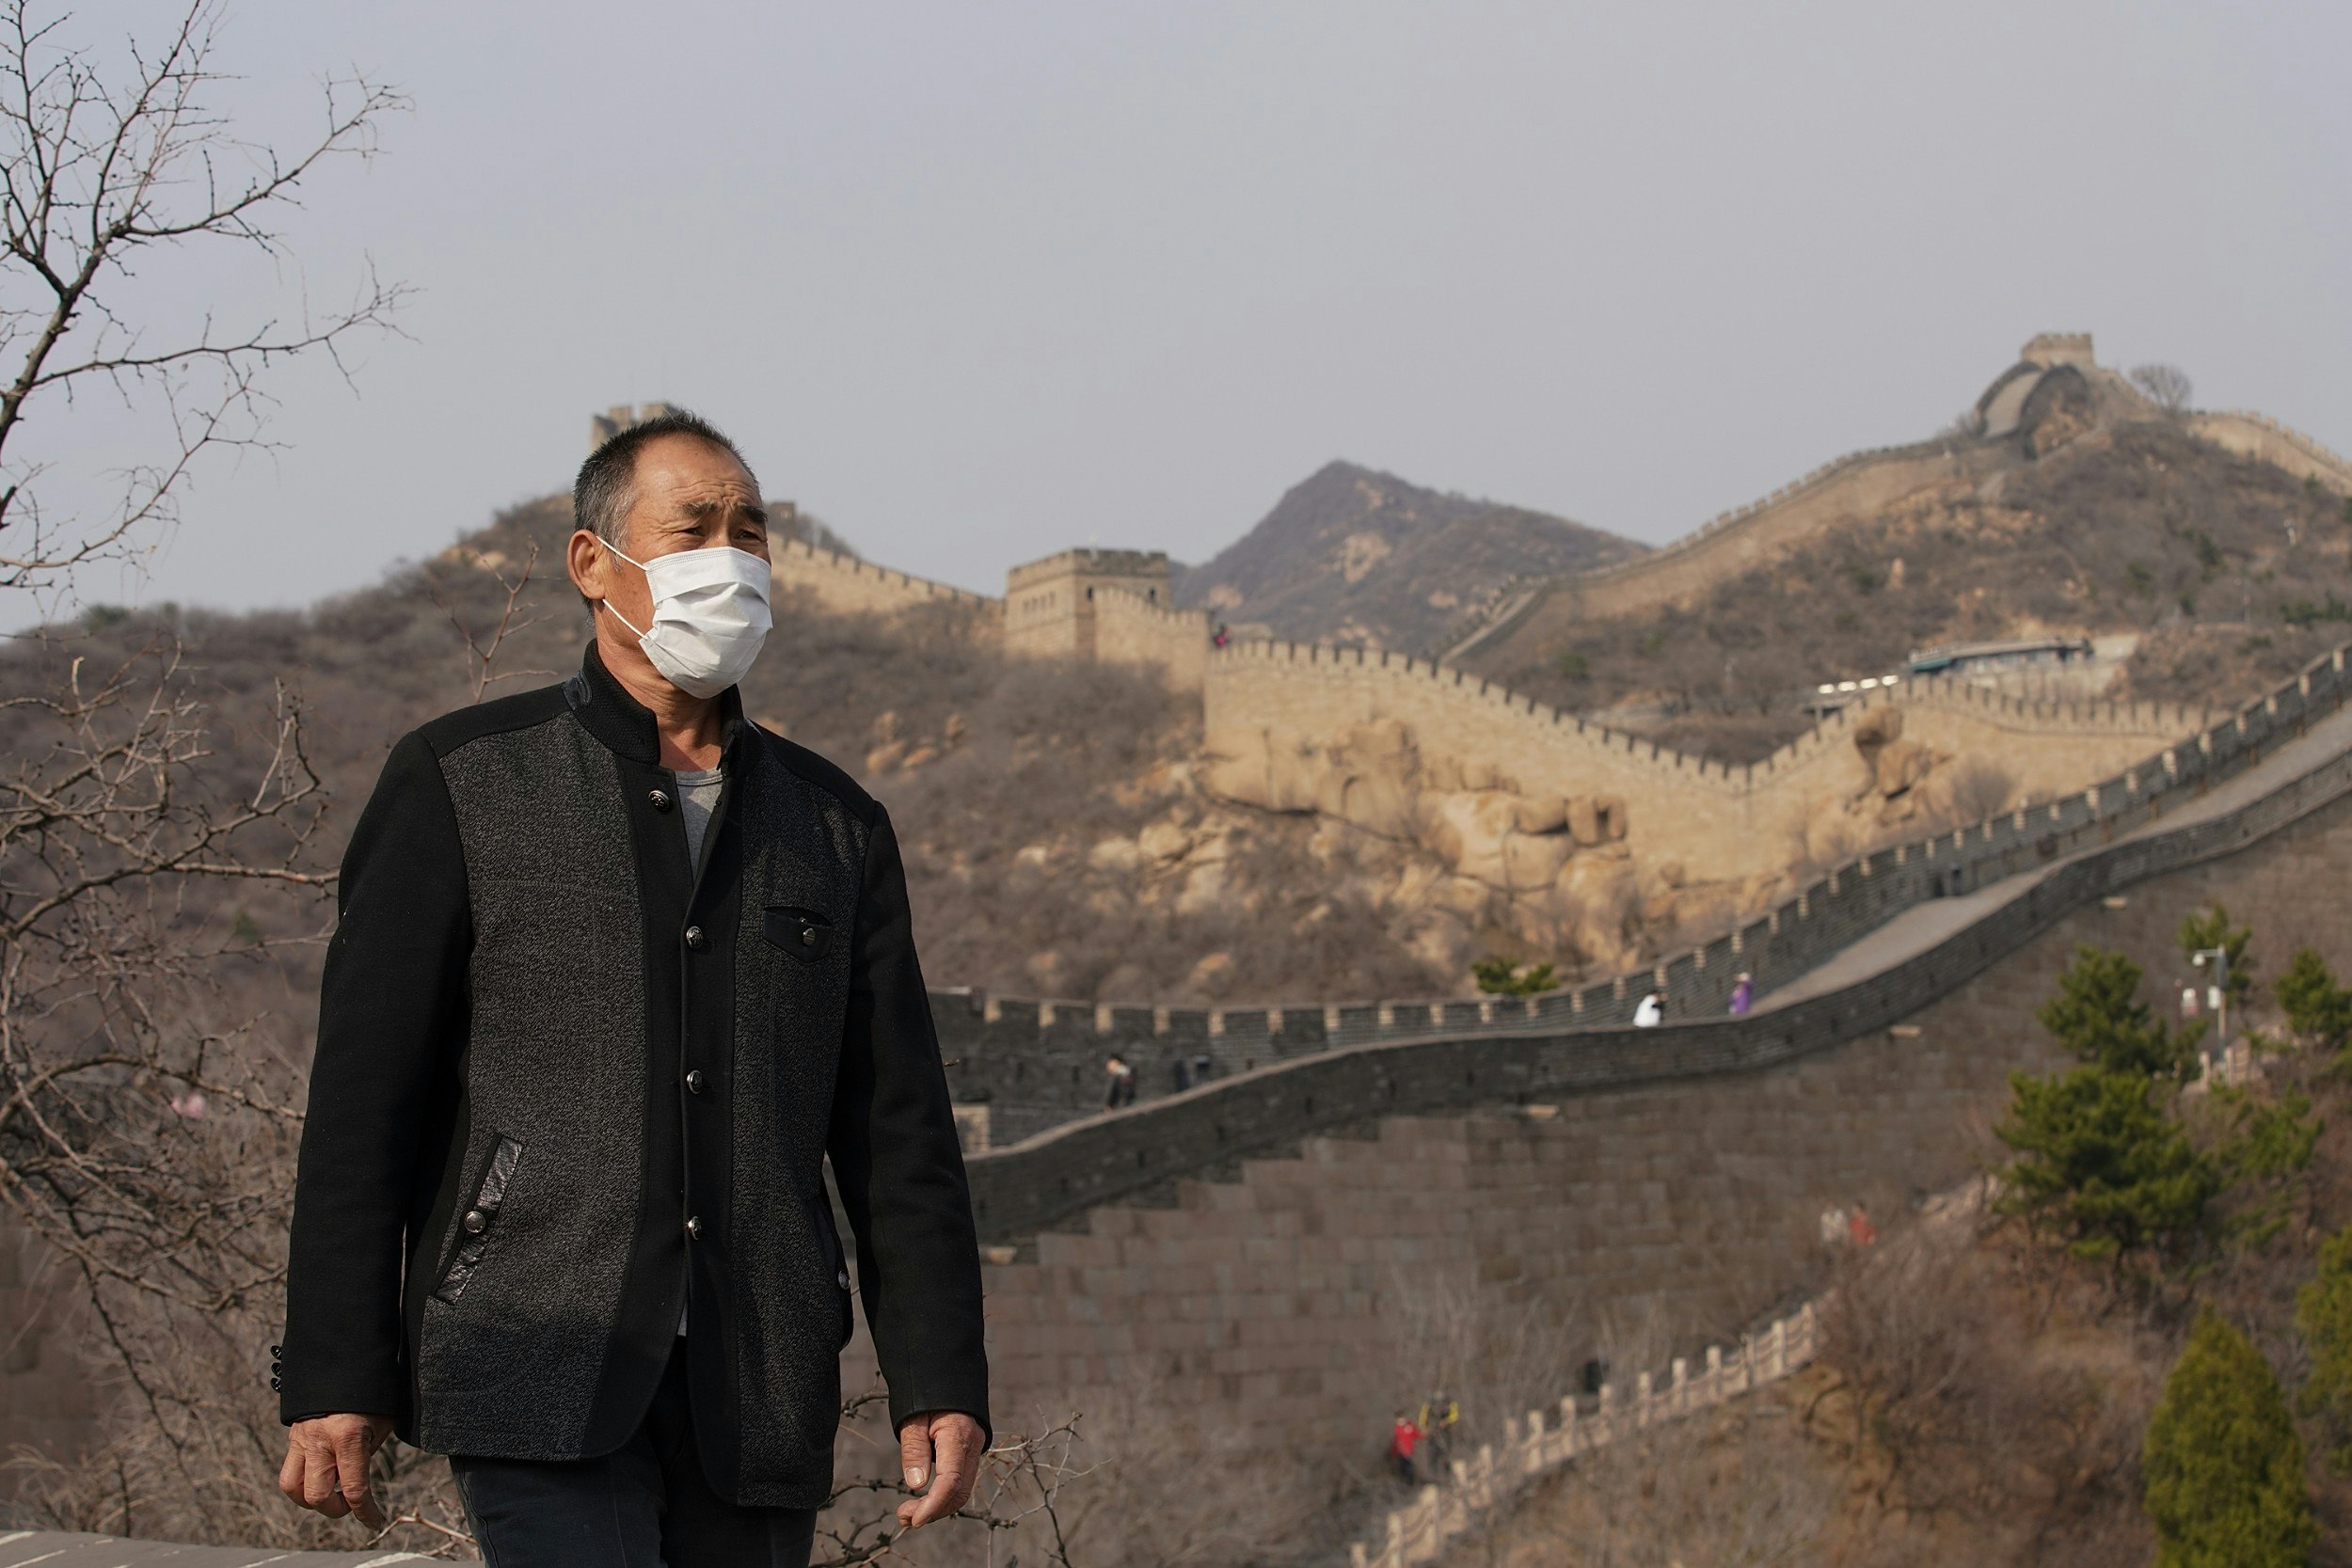 A man wearing a health mask at the Badaling section of the Great Wall of China